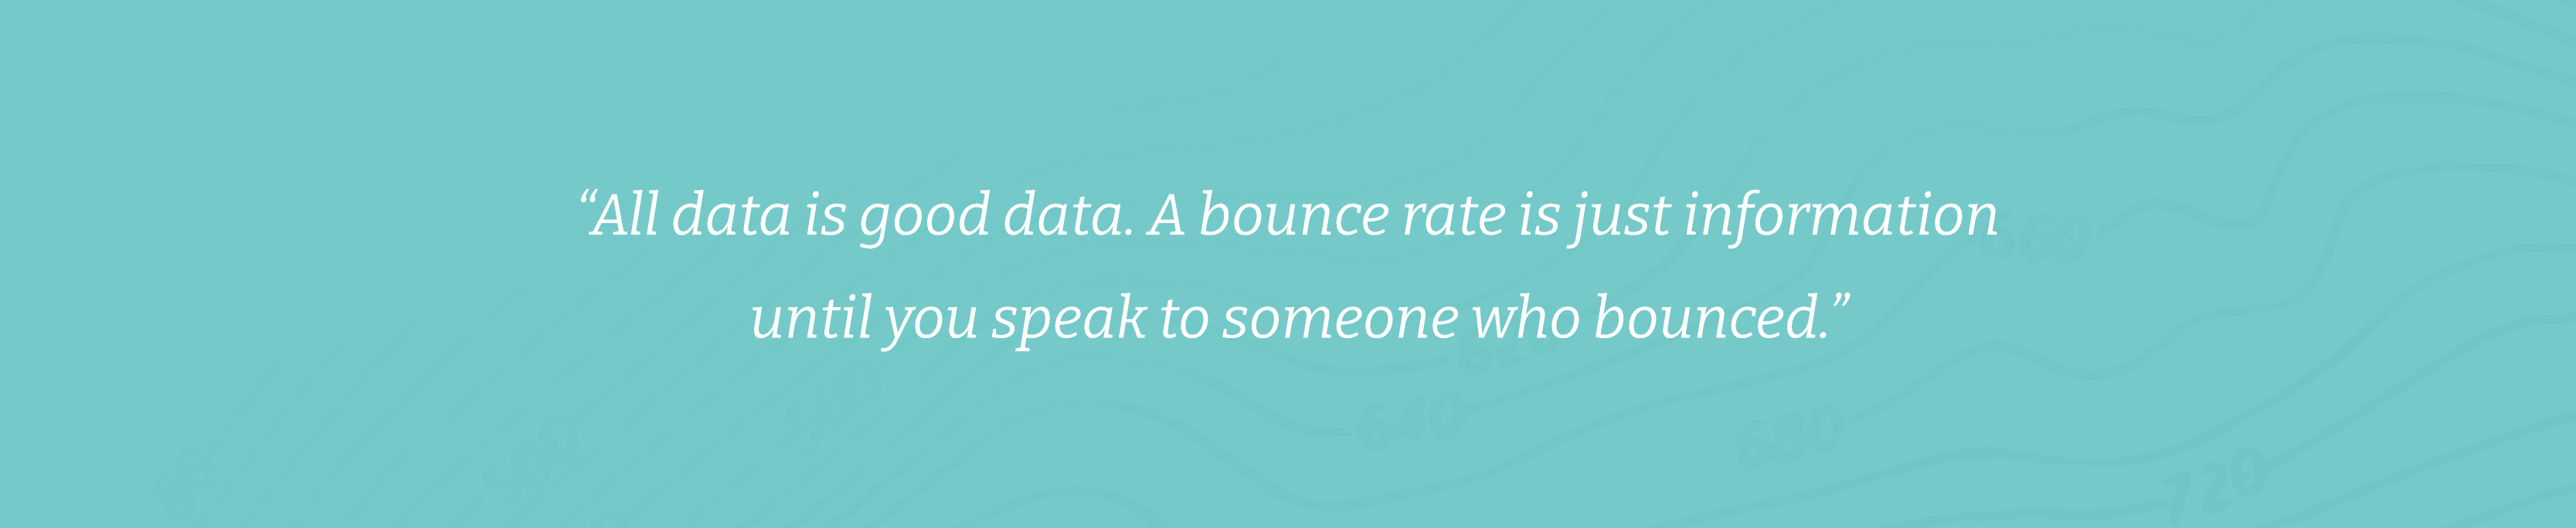 “All data is good data. A bounce rate is just information until you speak to someone who bounced.”